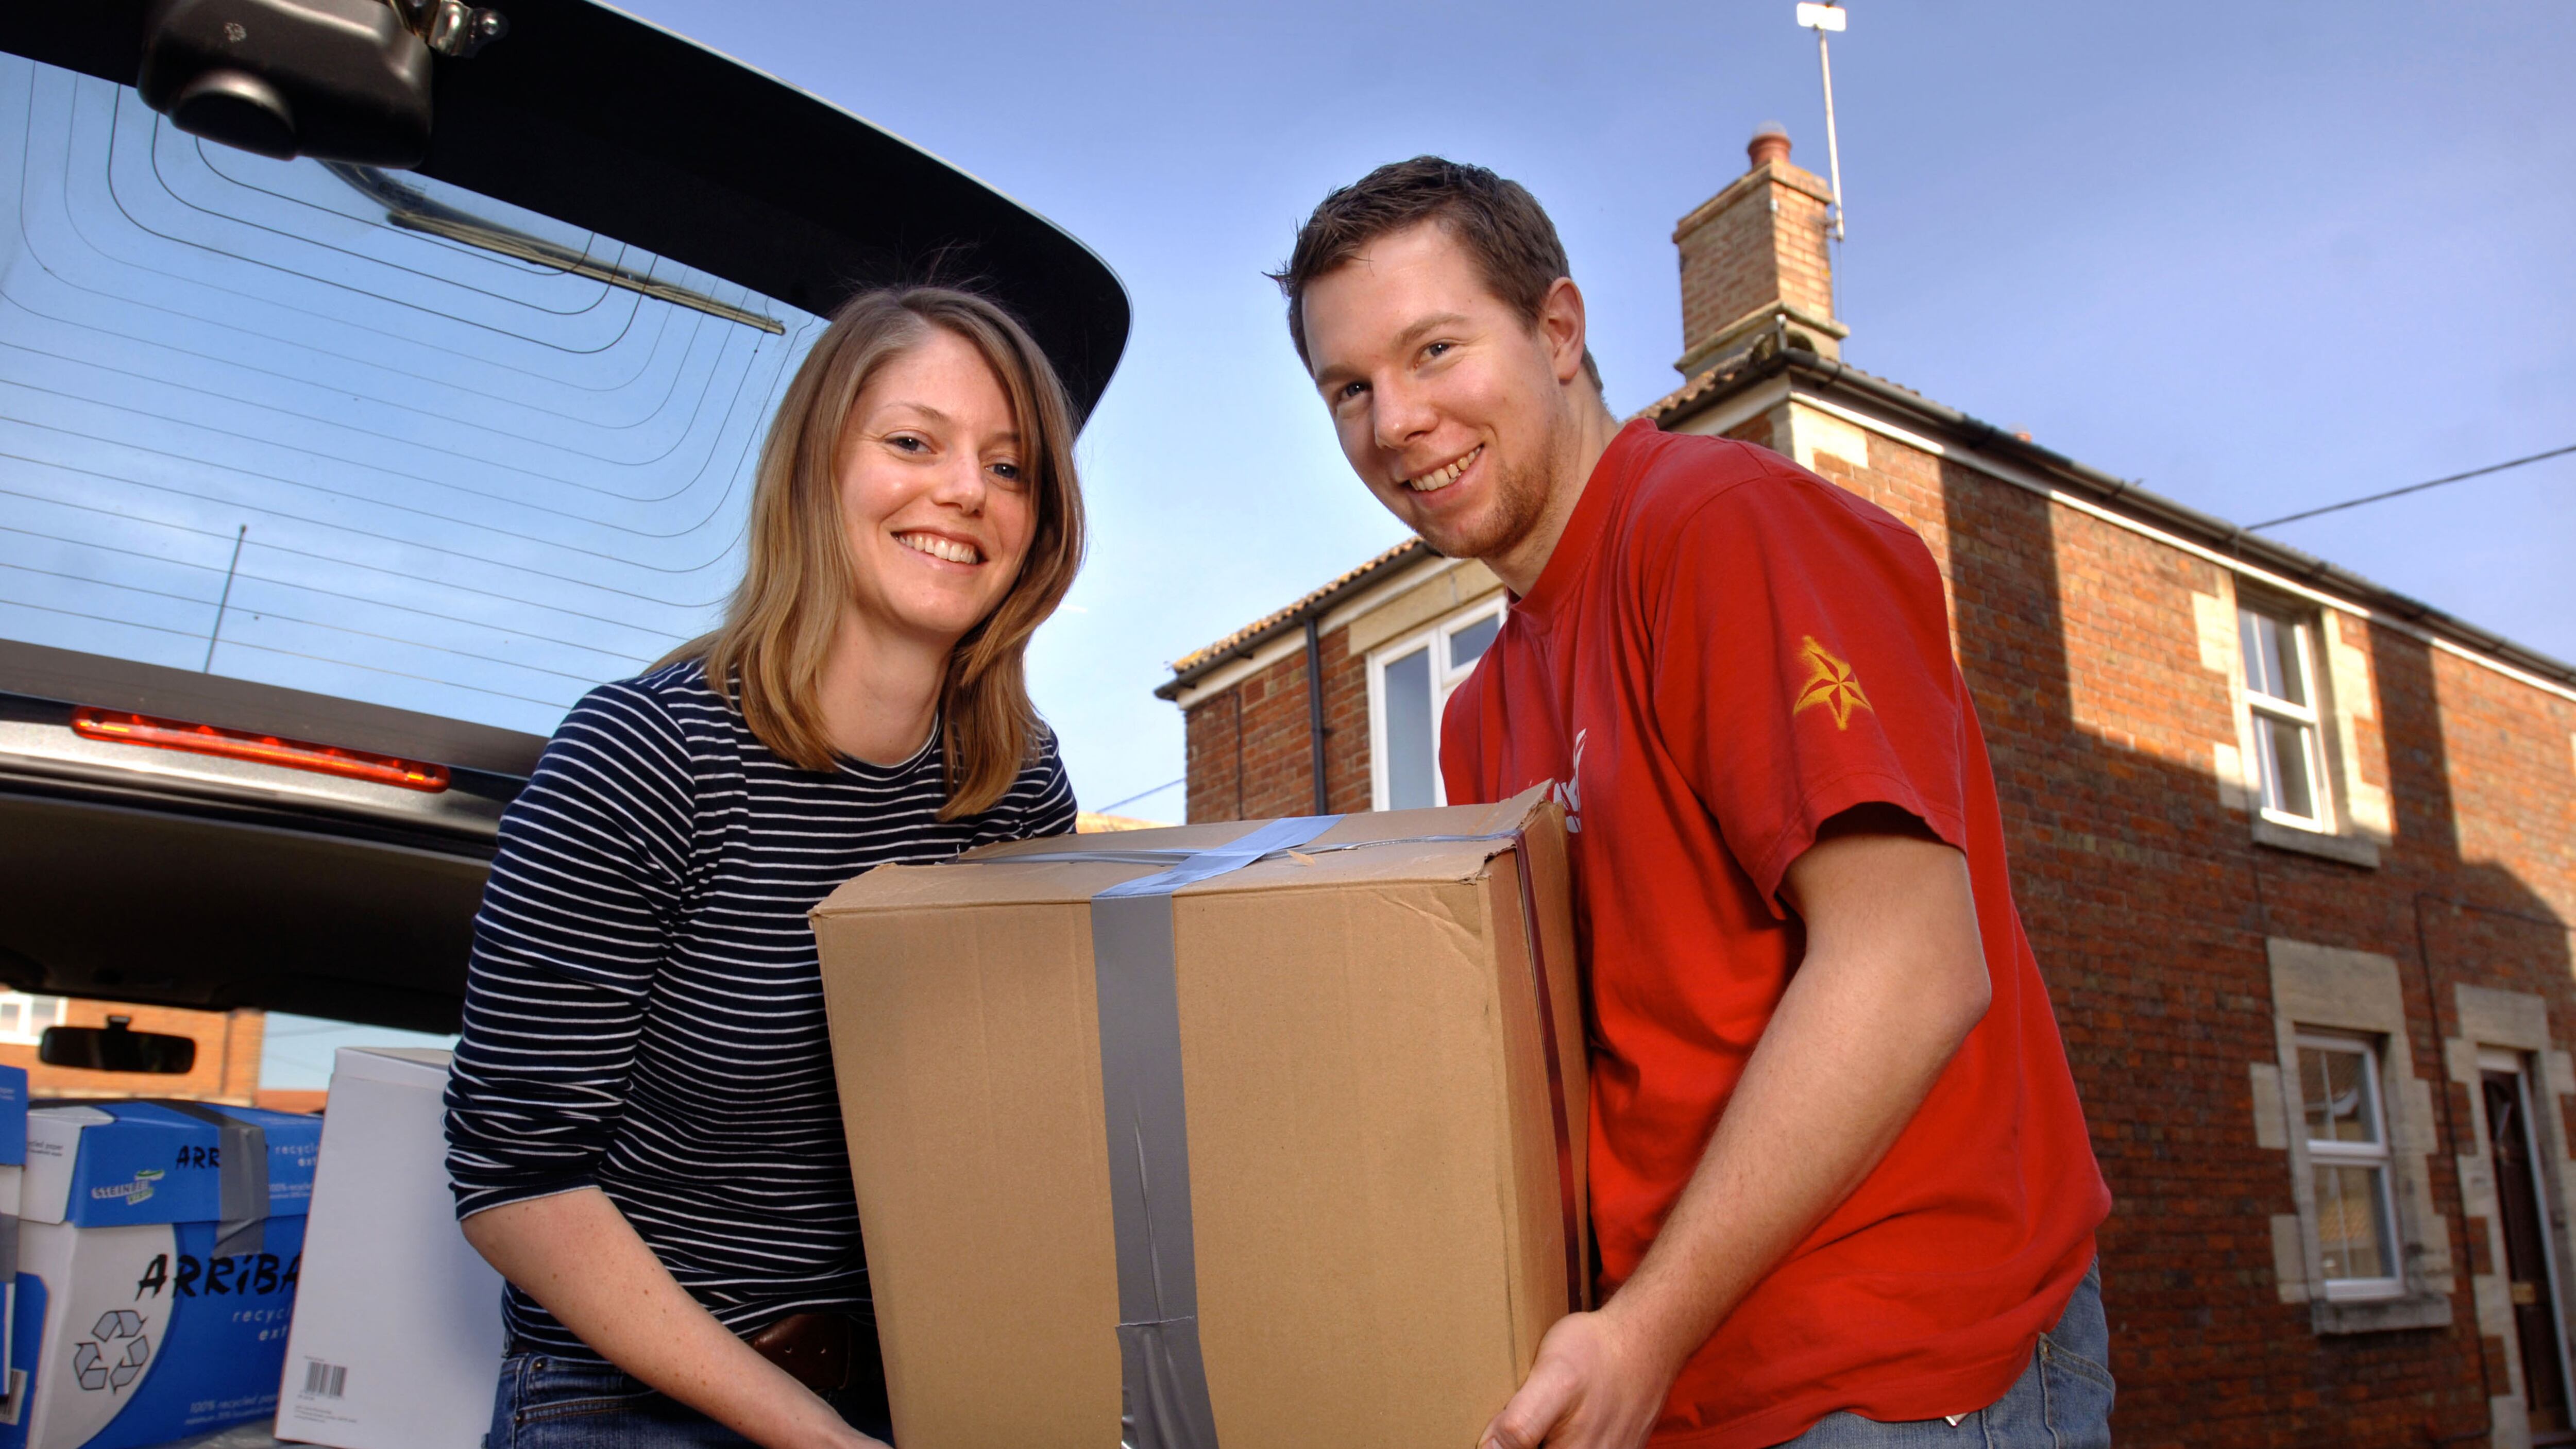 There may be some ways aspiring first-time buyers can broaden their options